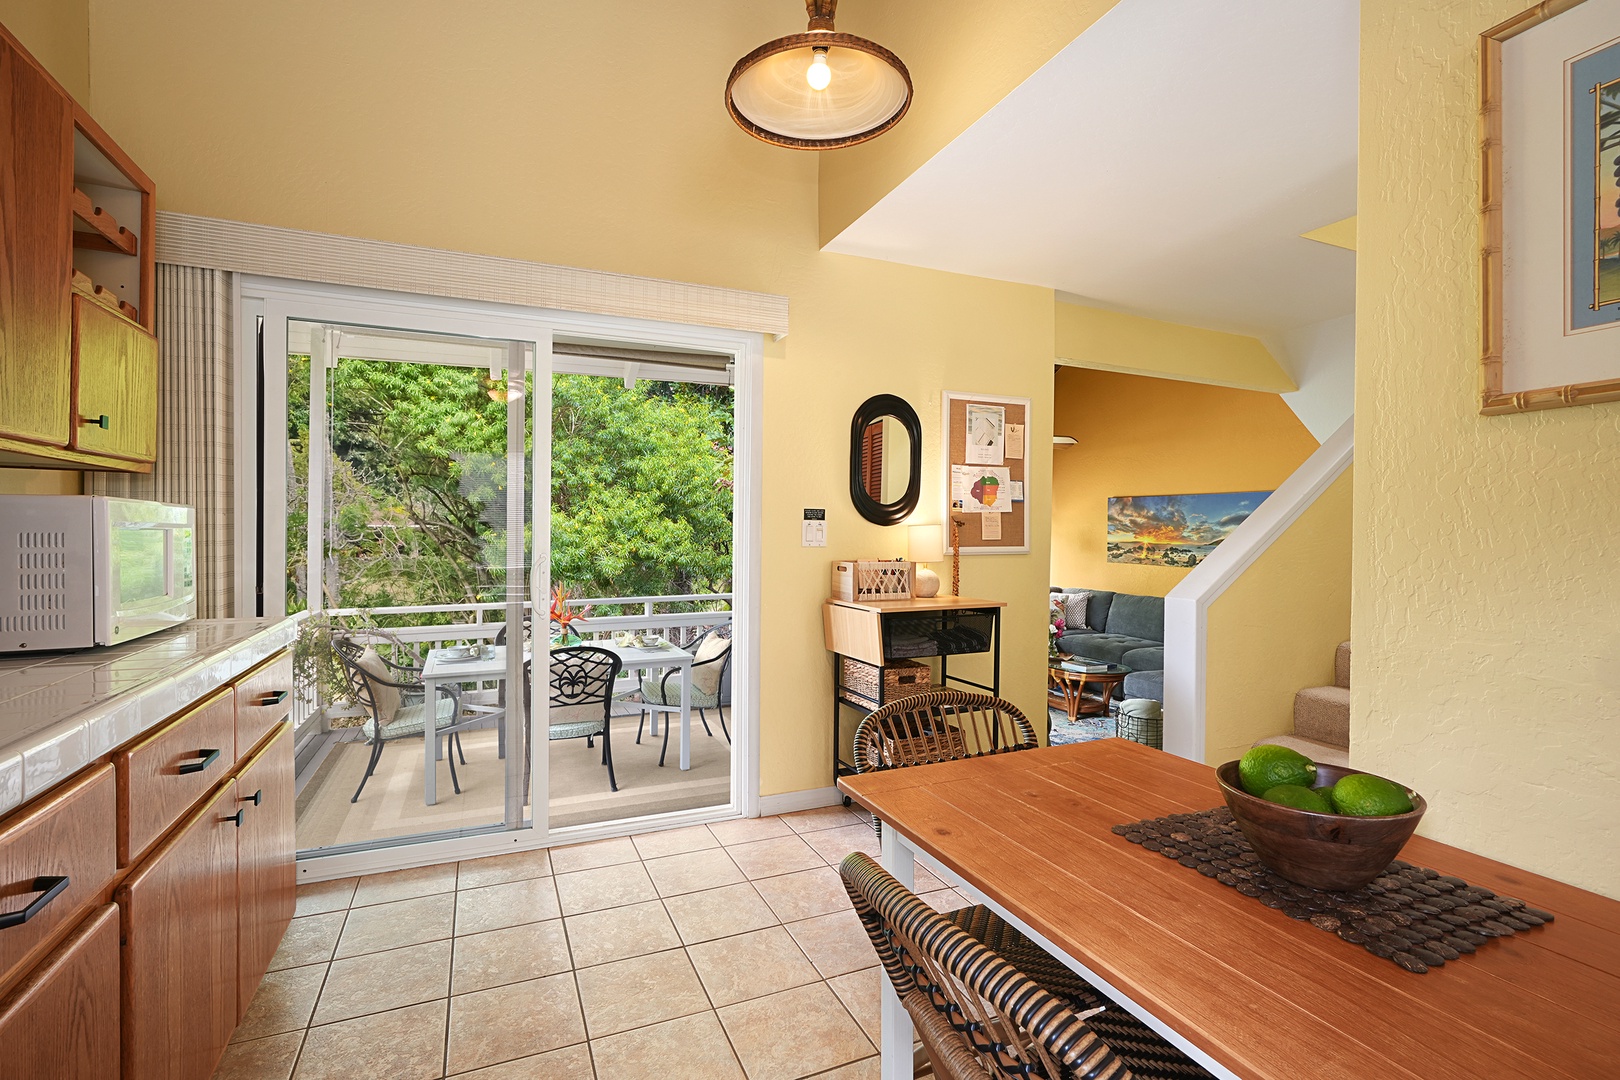 Koloa Vacation Rentals, Kauai Birdsong at Poipu Crater - A breakfast nook is adjacent to the kitchen and a direct access to the lanai for an al fresco dining option!